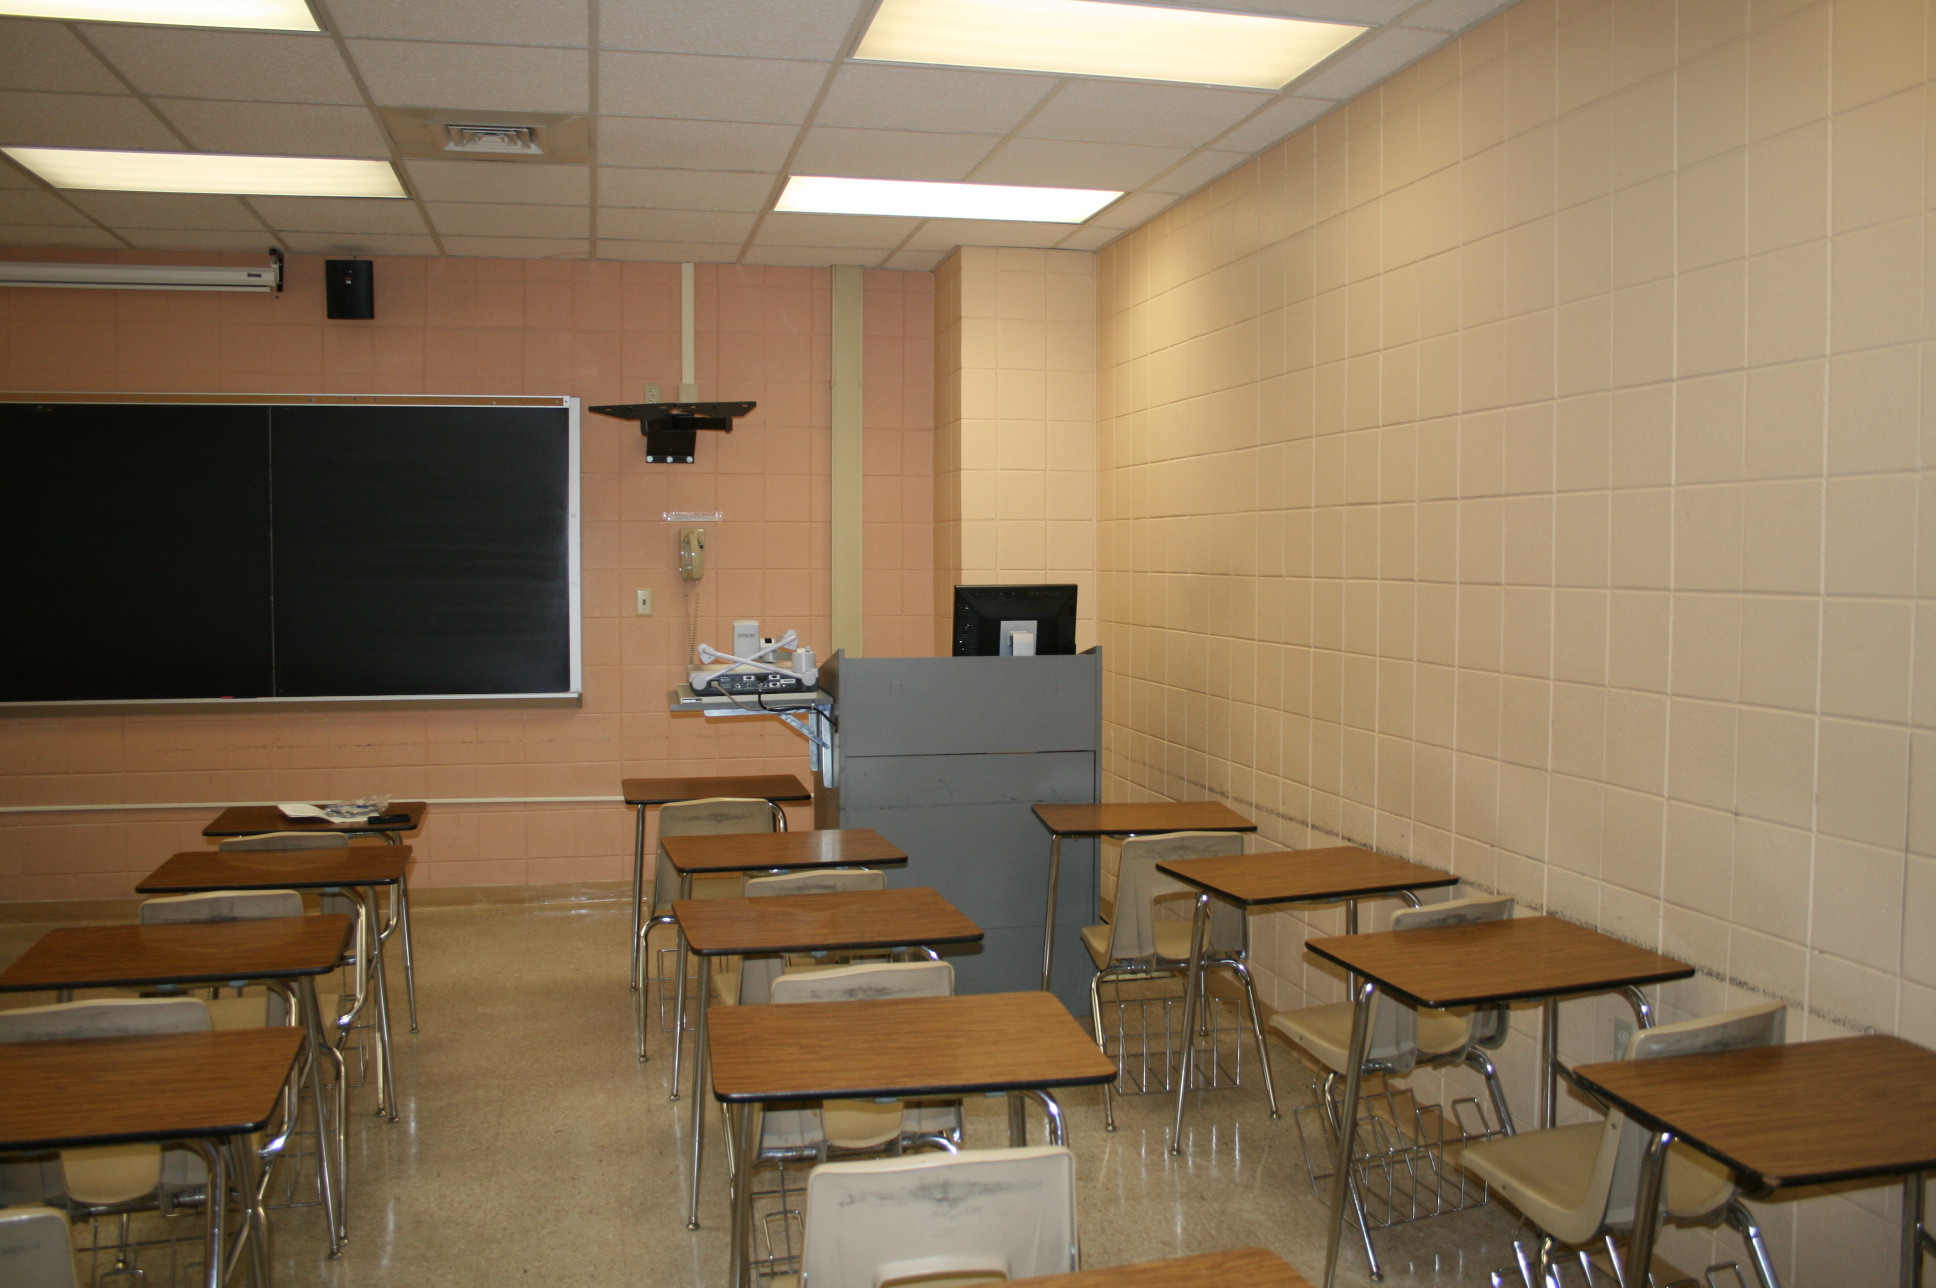 An image of Tureaud 101 taken from the back of the classroom